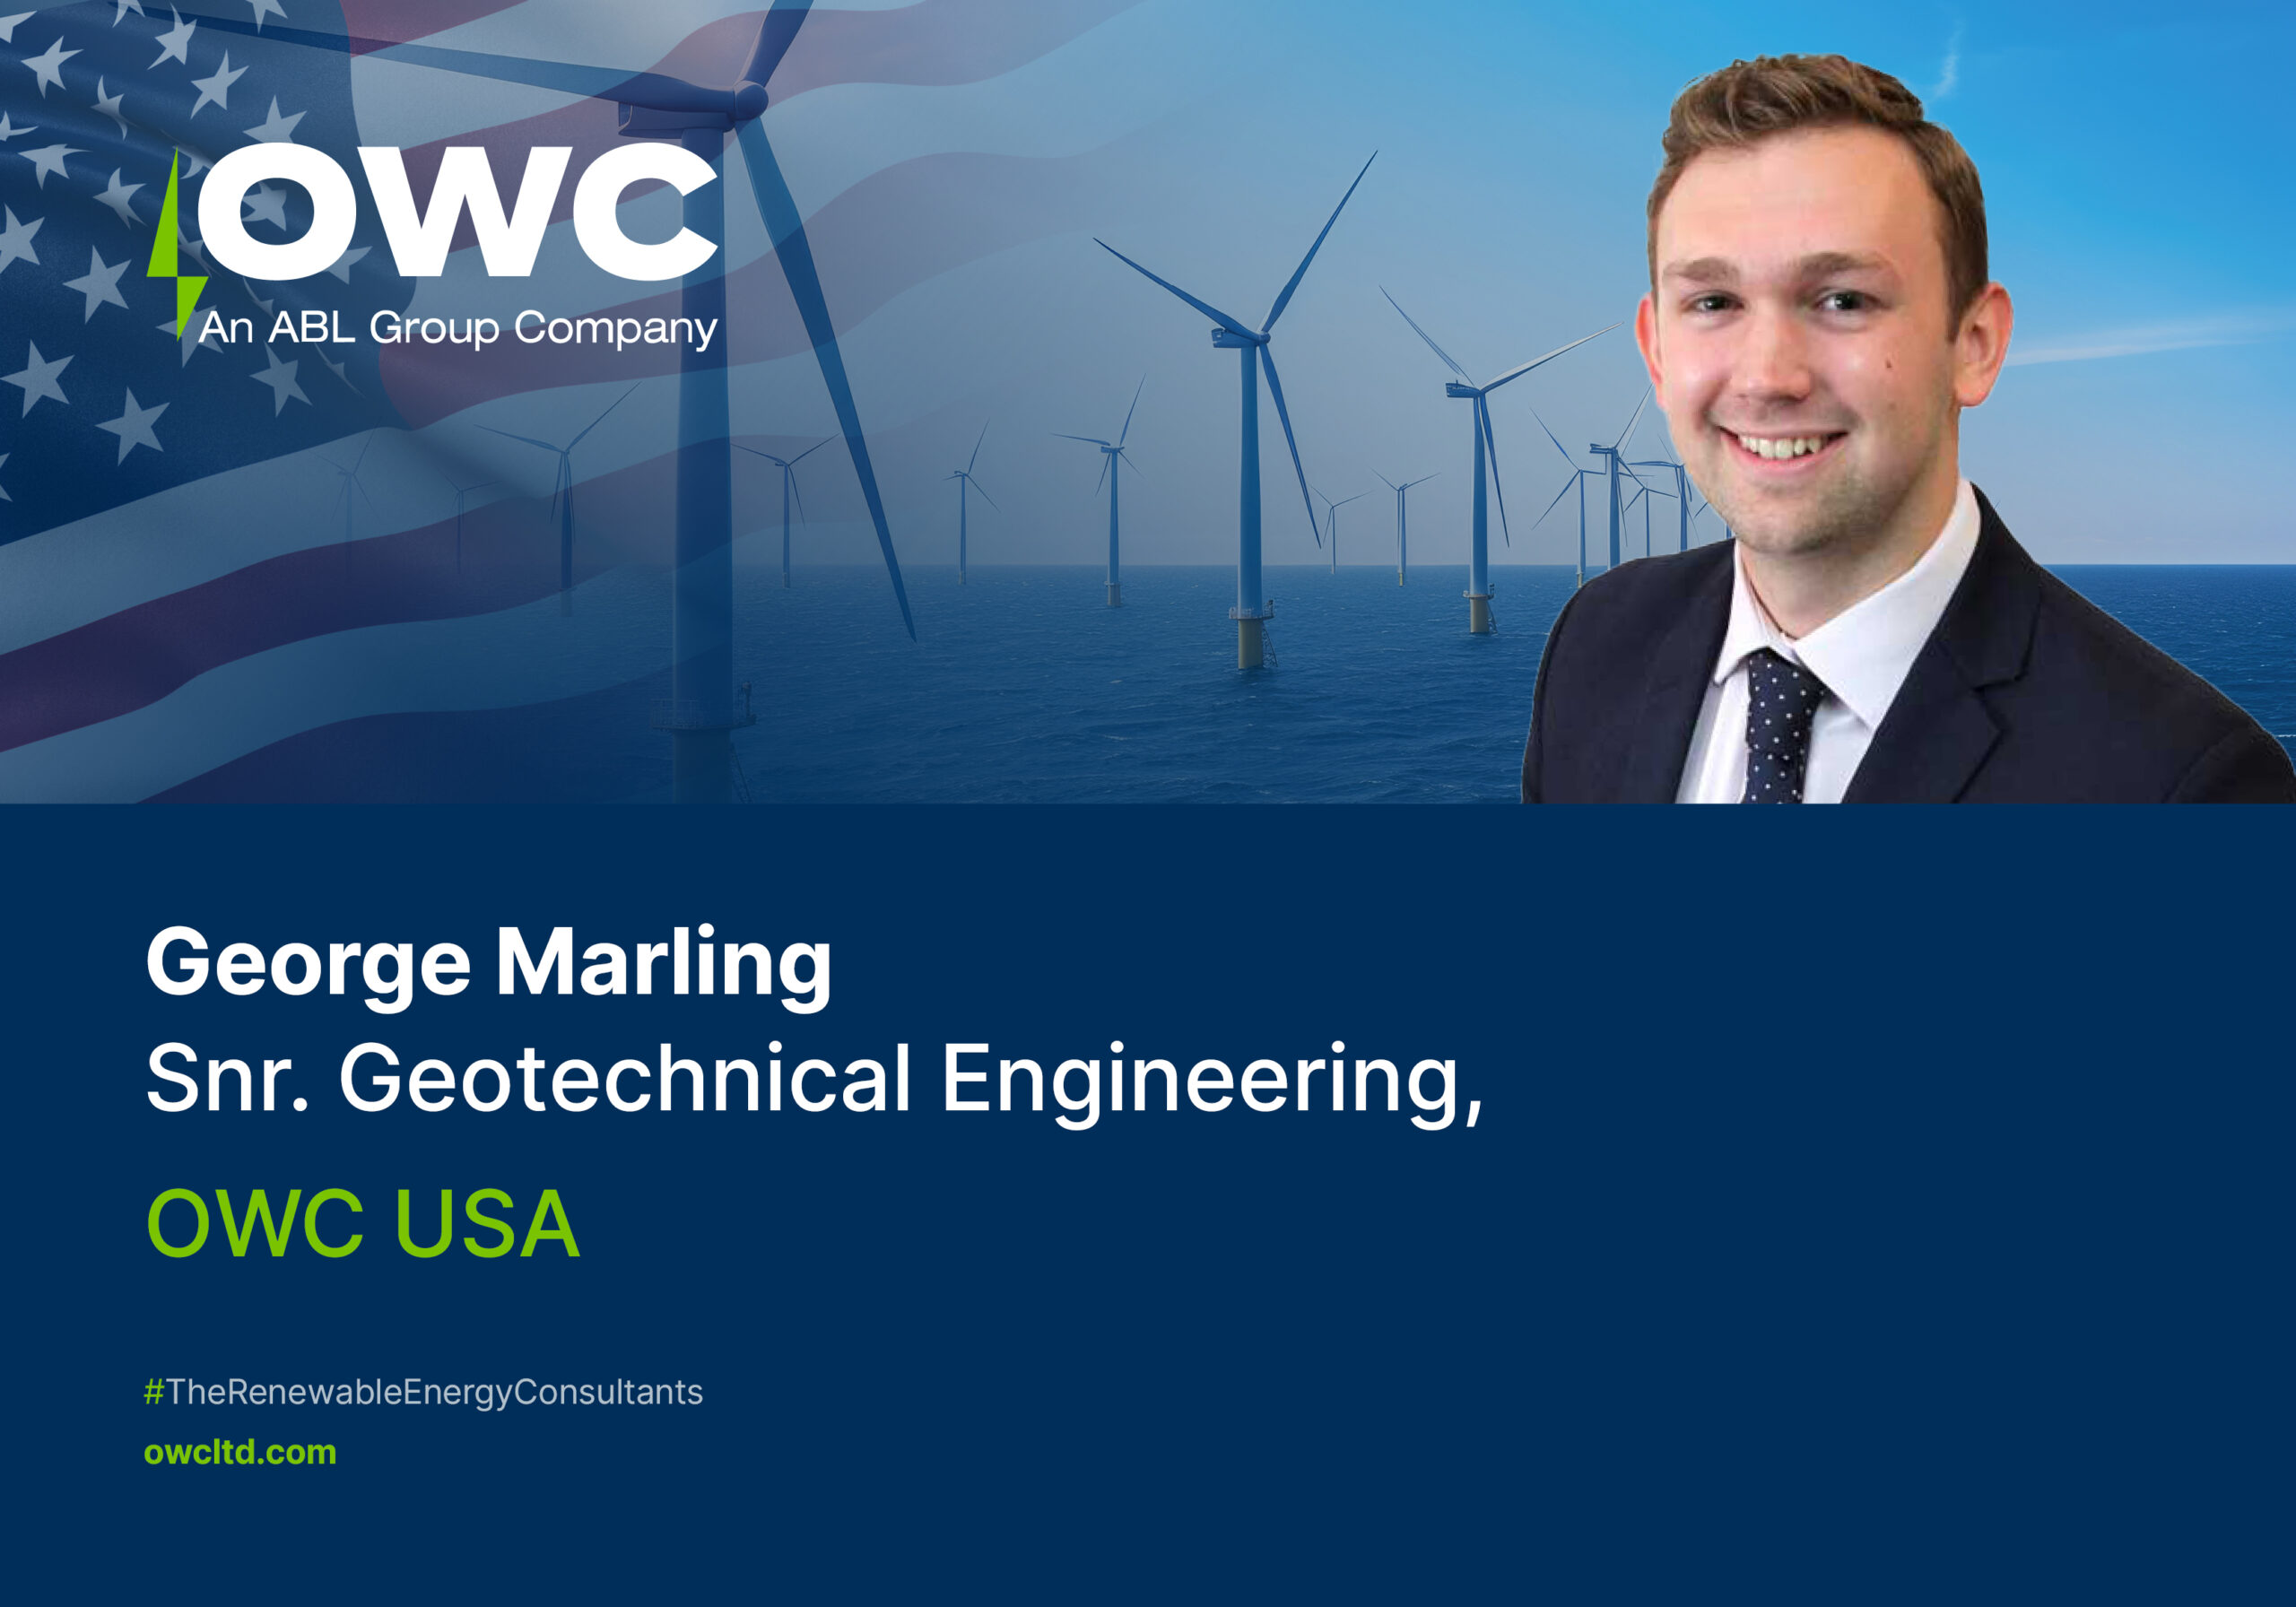 Meet the Team: George Marling, Snr. Geotechnical Engineer | OWC USA